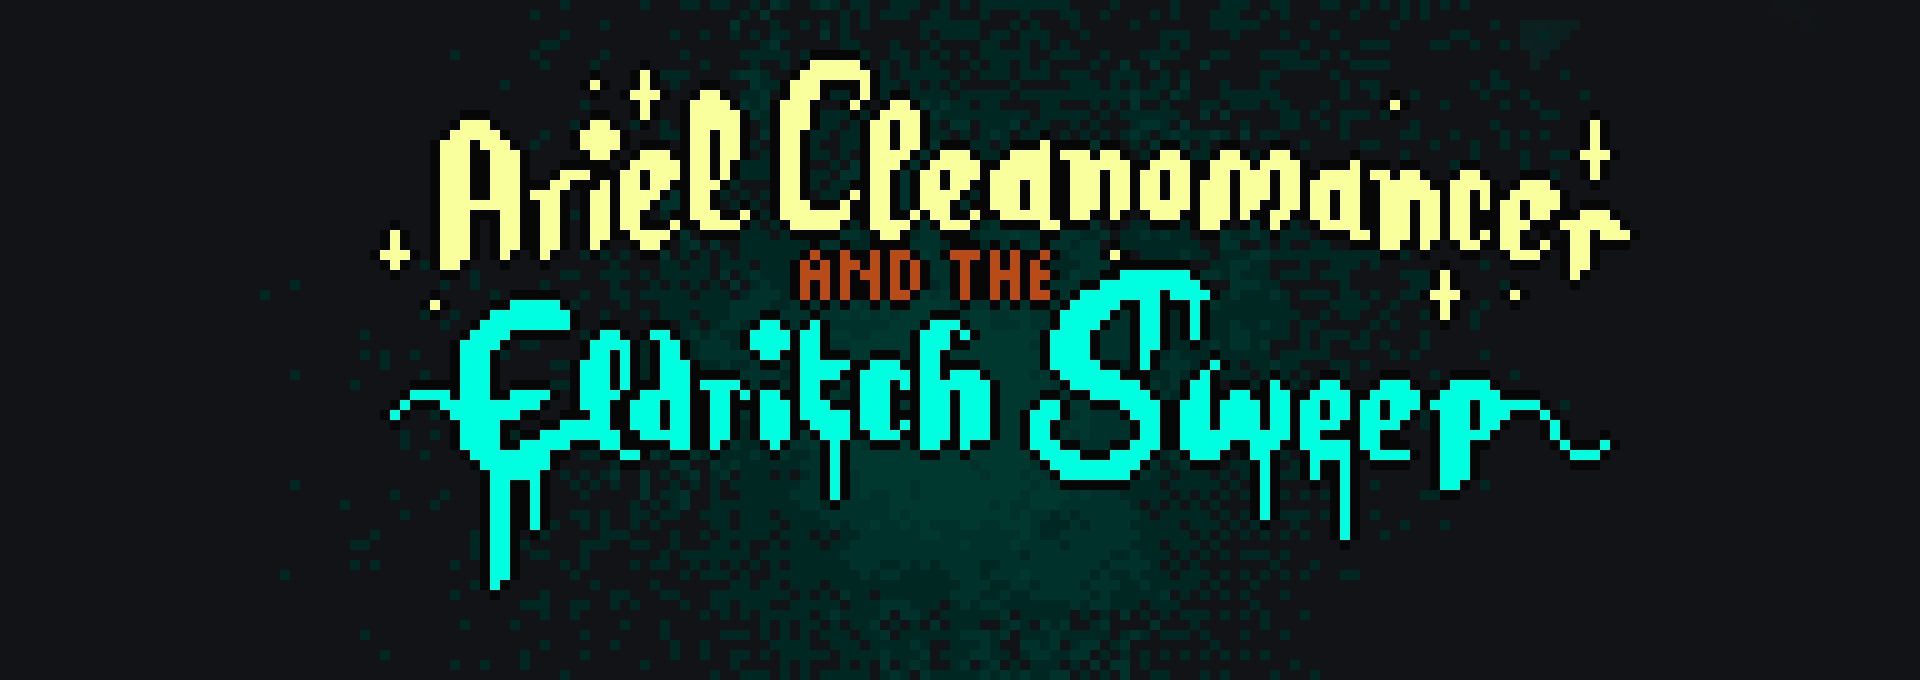 Ariel Cleanomancer and the Eldritch Sweep